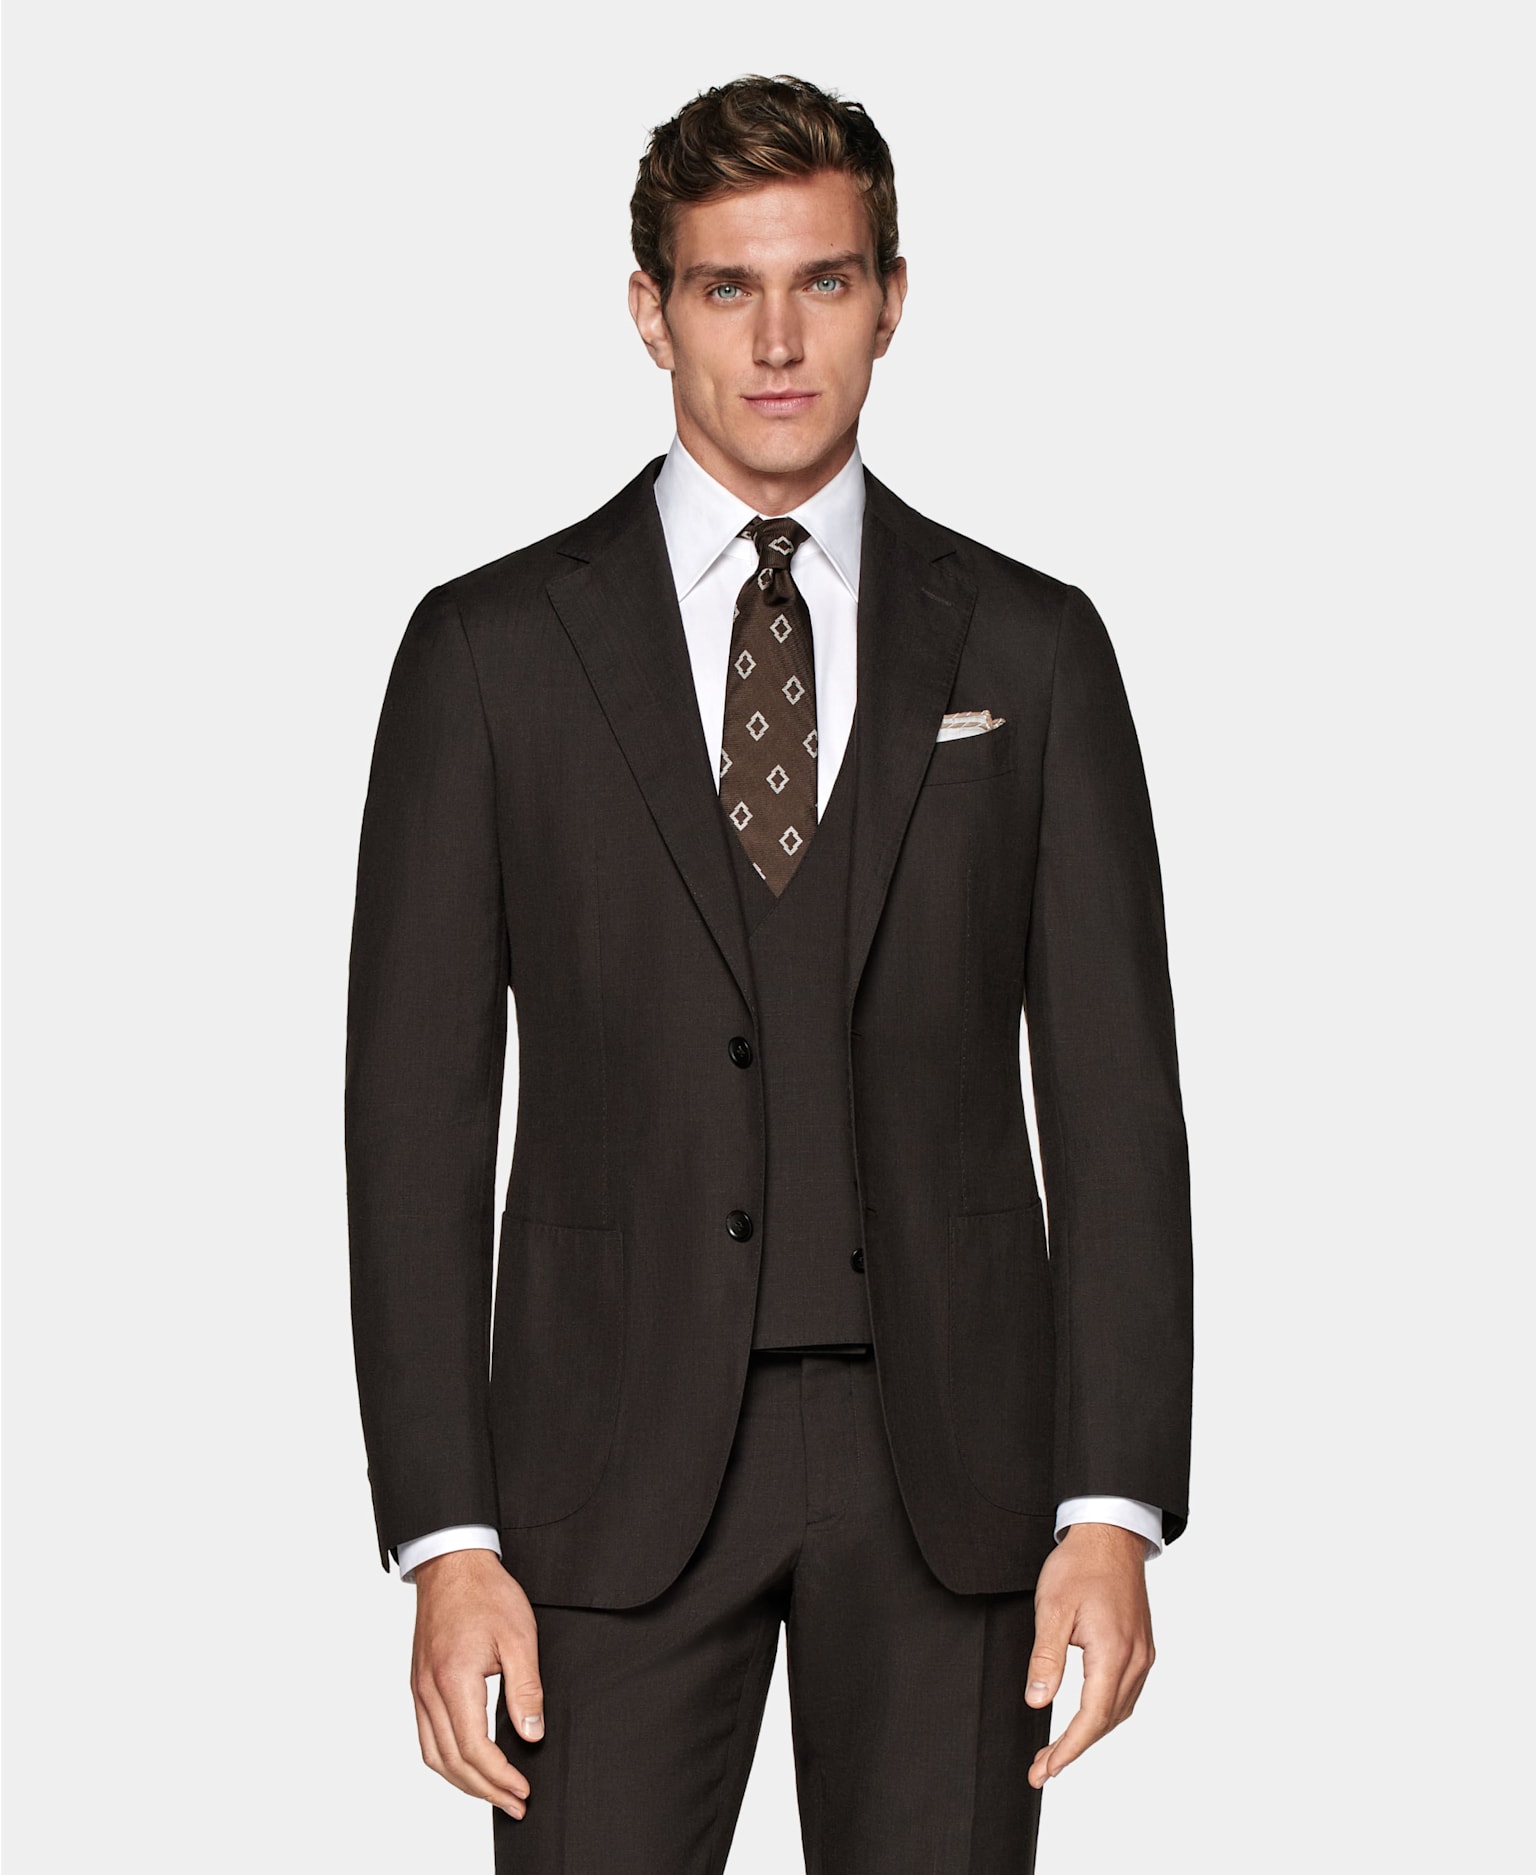 dark brown three-piece suit with white shirt, brown patterned tie and pocket square.